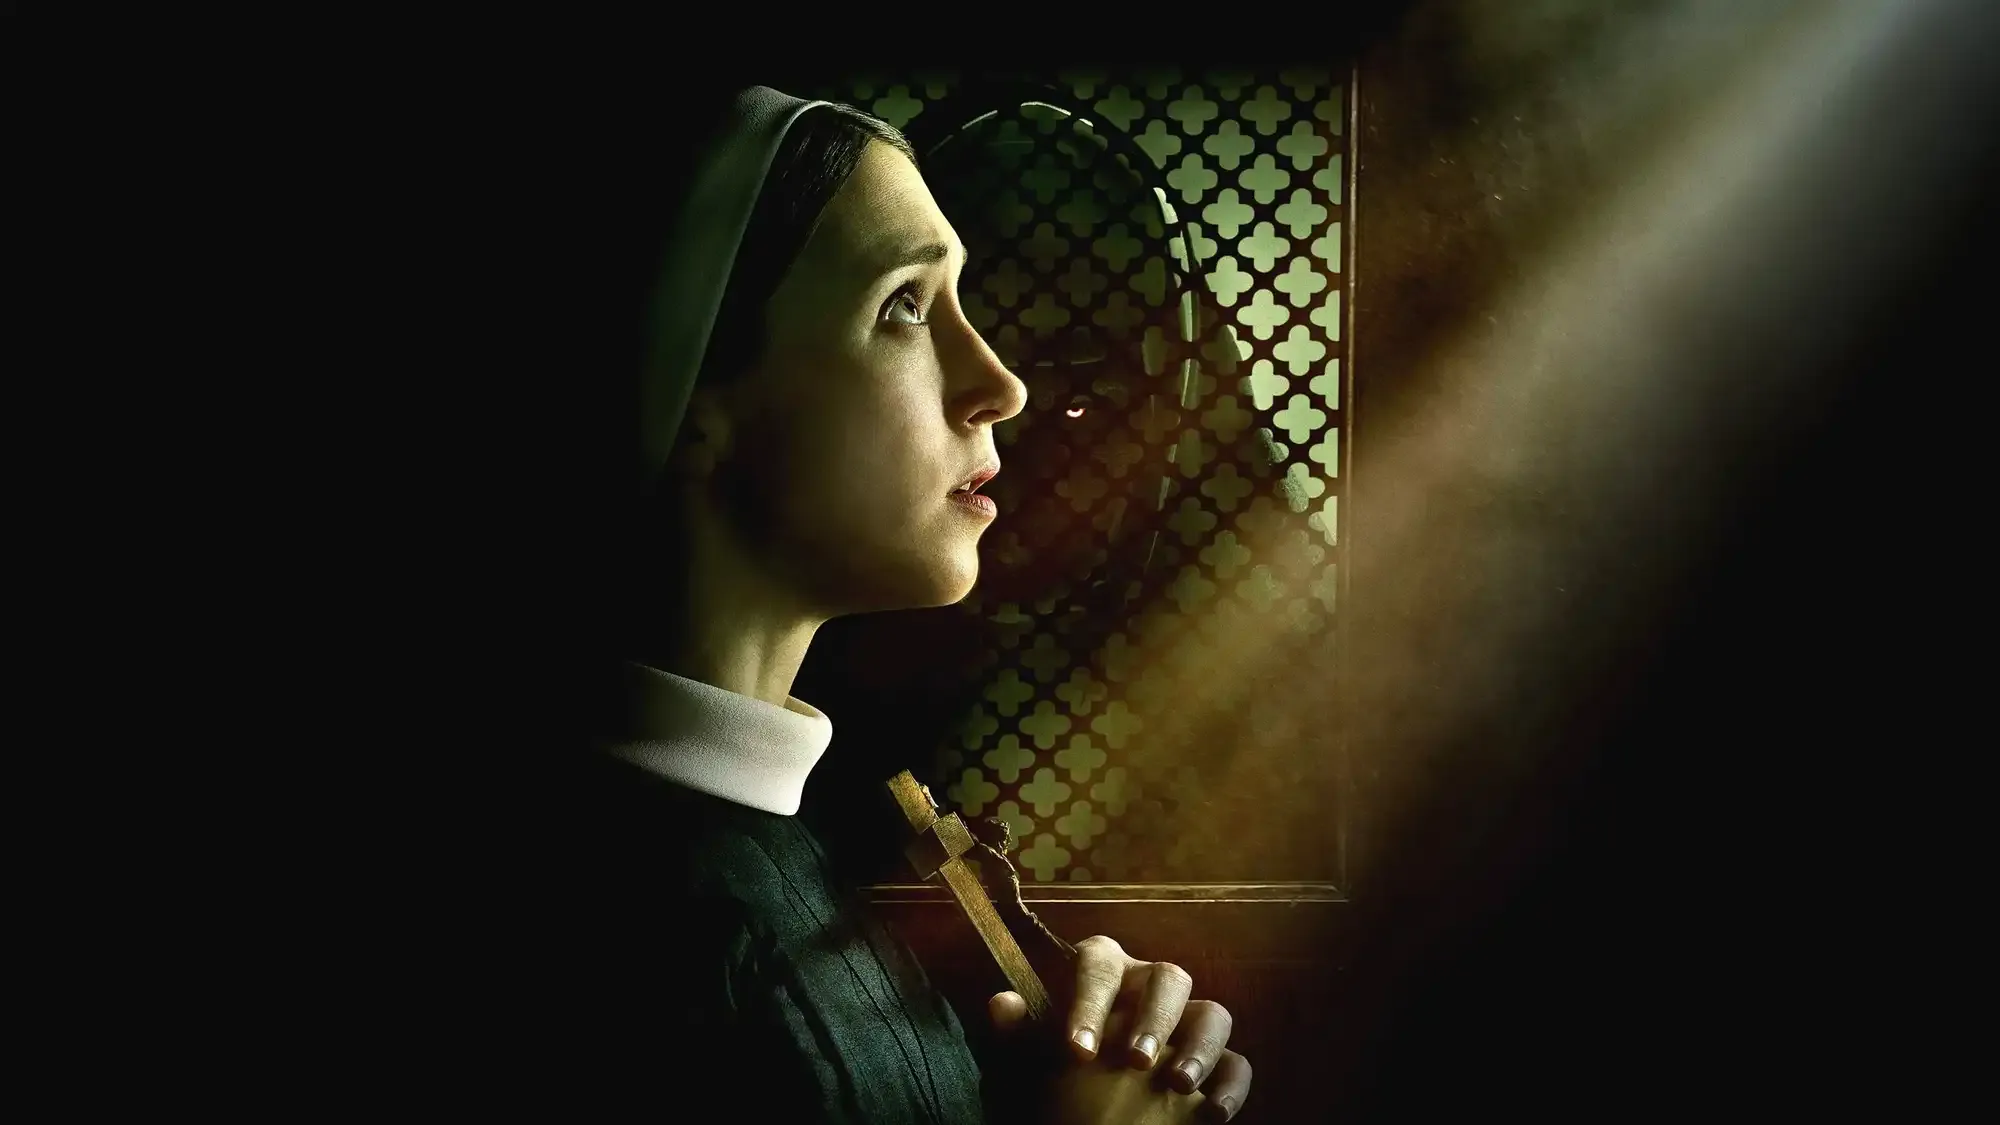 The Nun II movie review